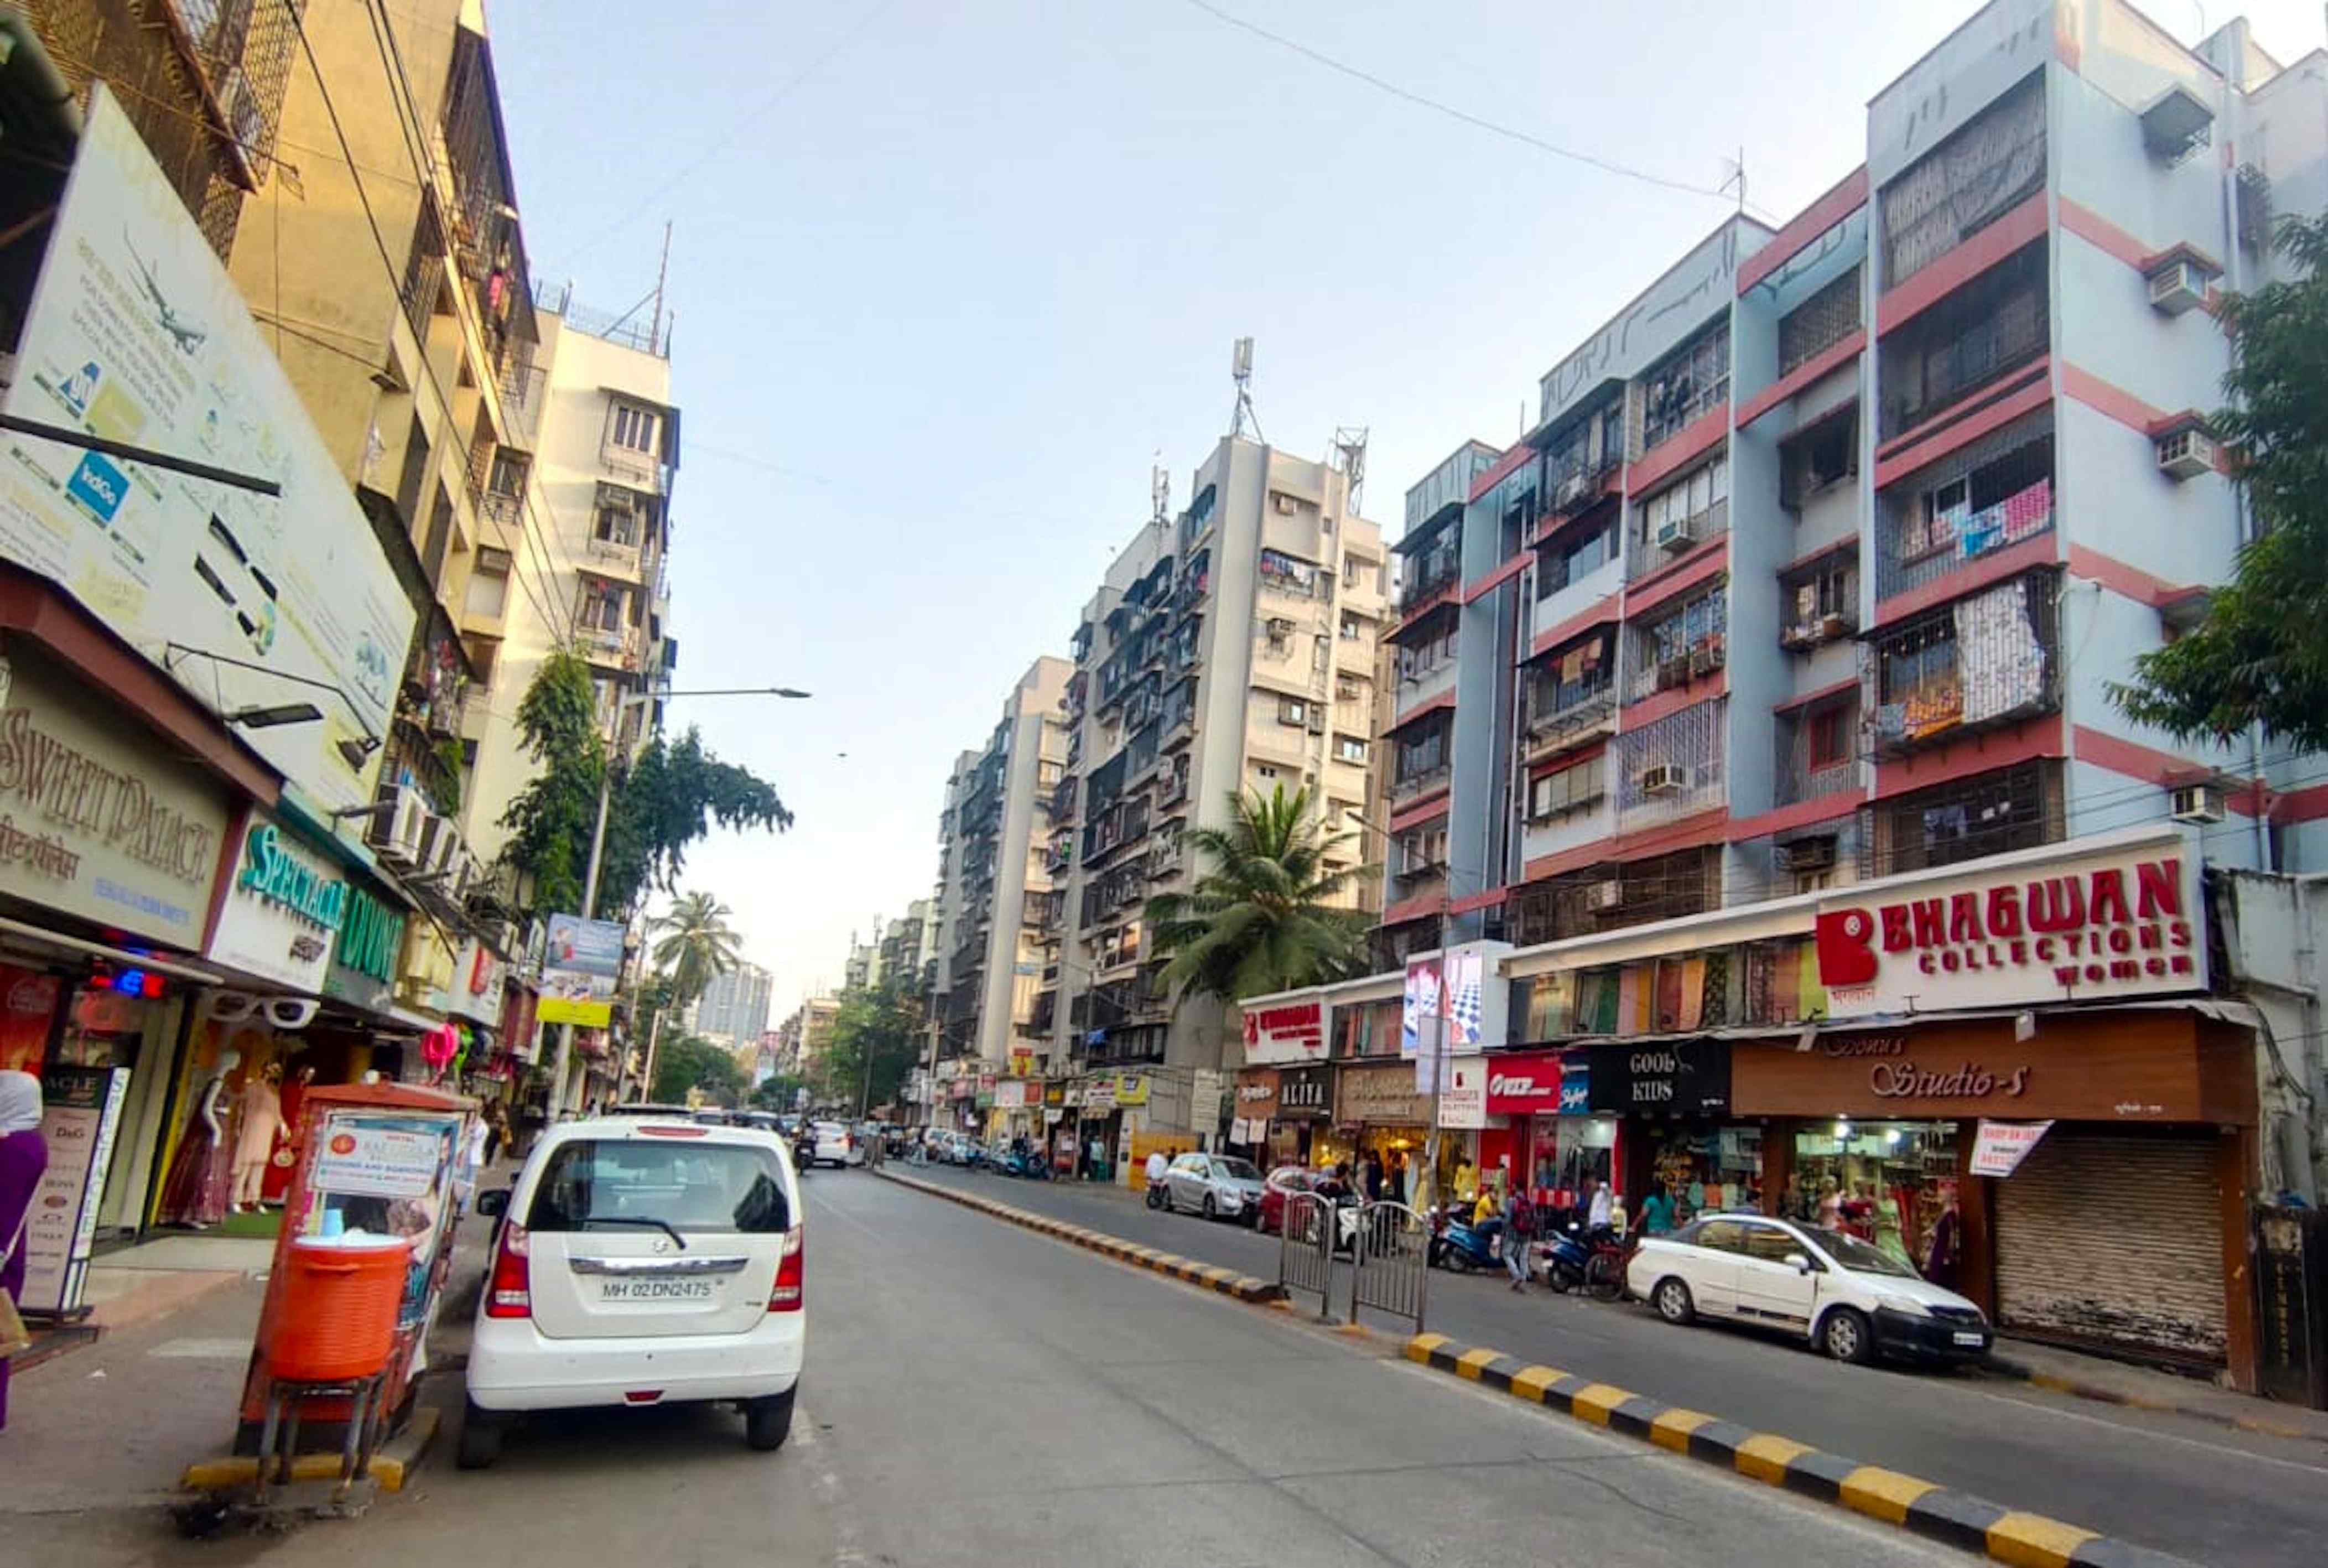 Lokhandwala Market: One of the Best Places to Buy Appliances and Electronics